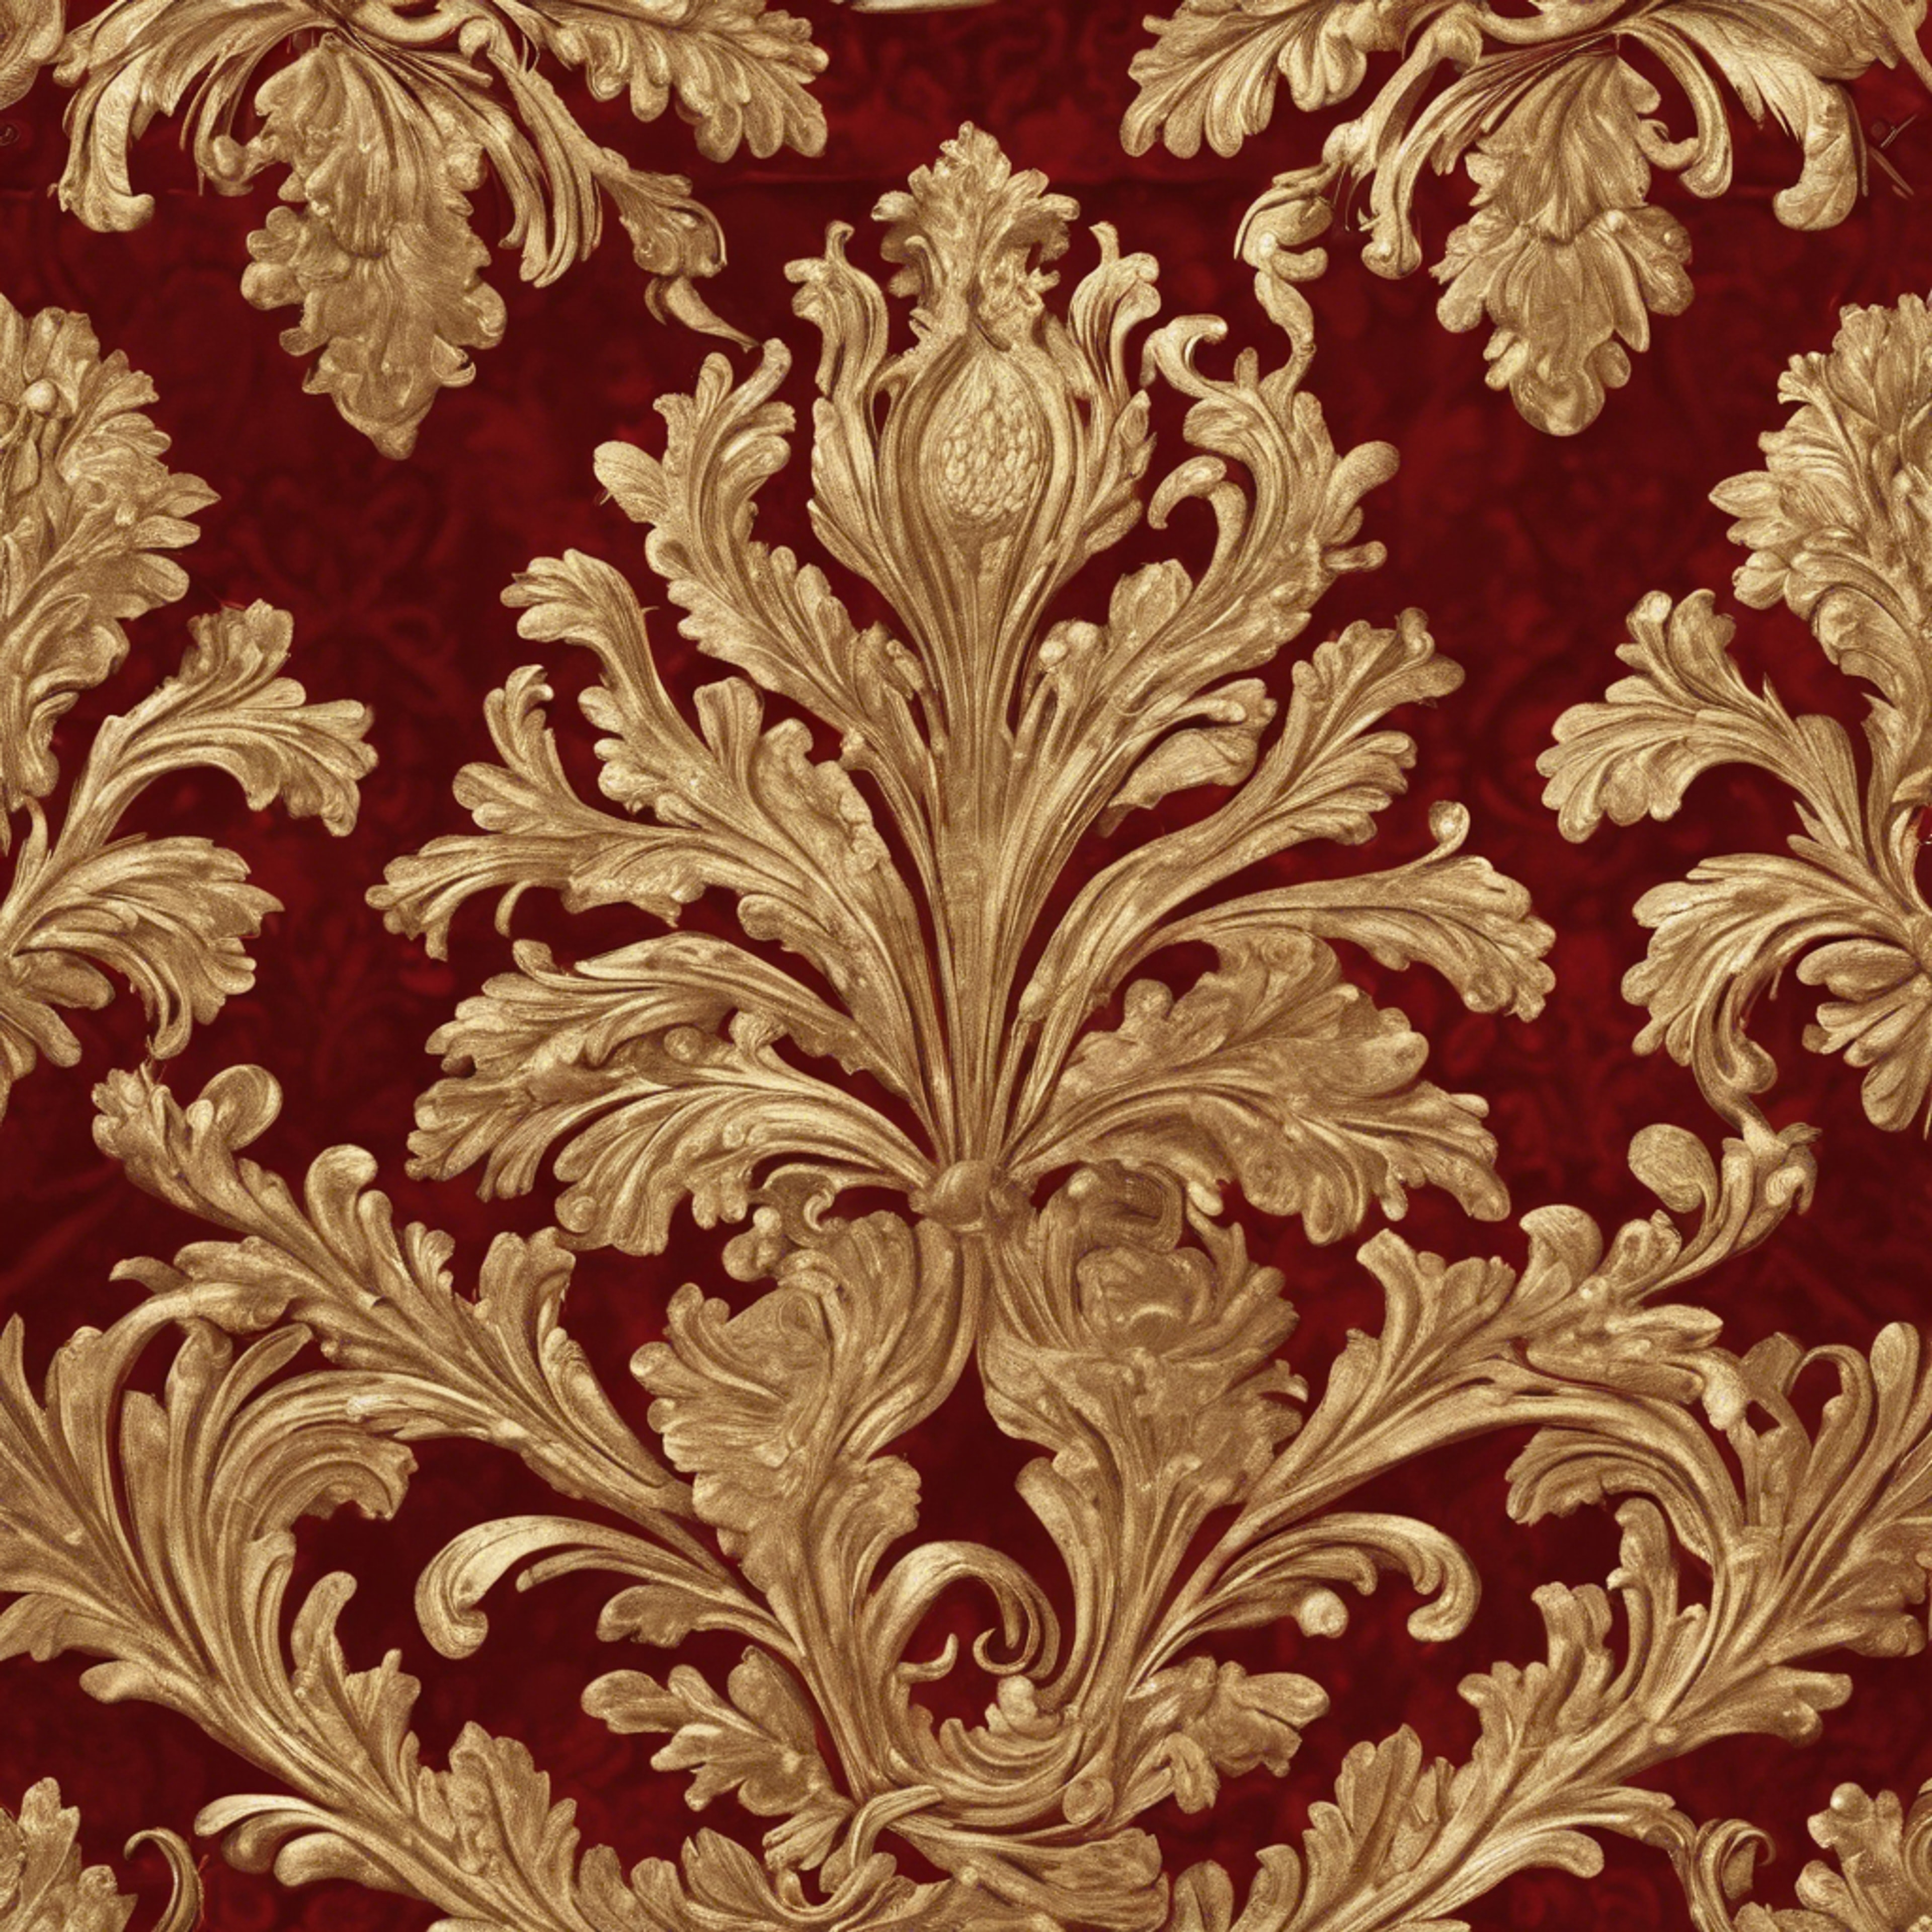 A dramatic seamless design of antique gold damask on a canvas of cardinal red velvet. کاغذ دیواری[ac0bd922427a4985975e]